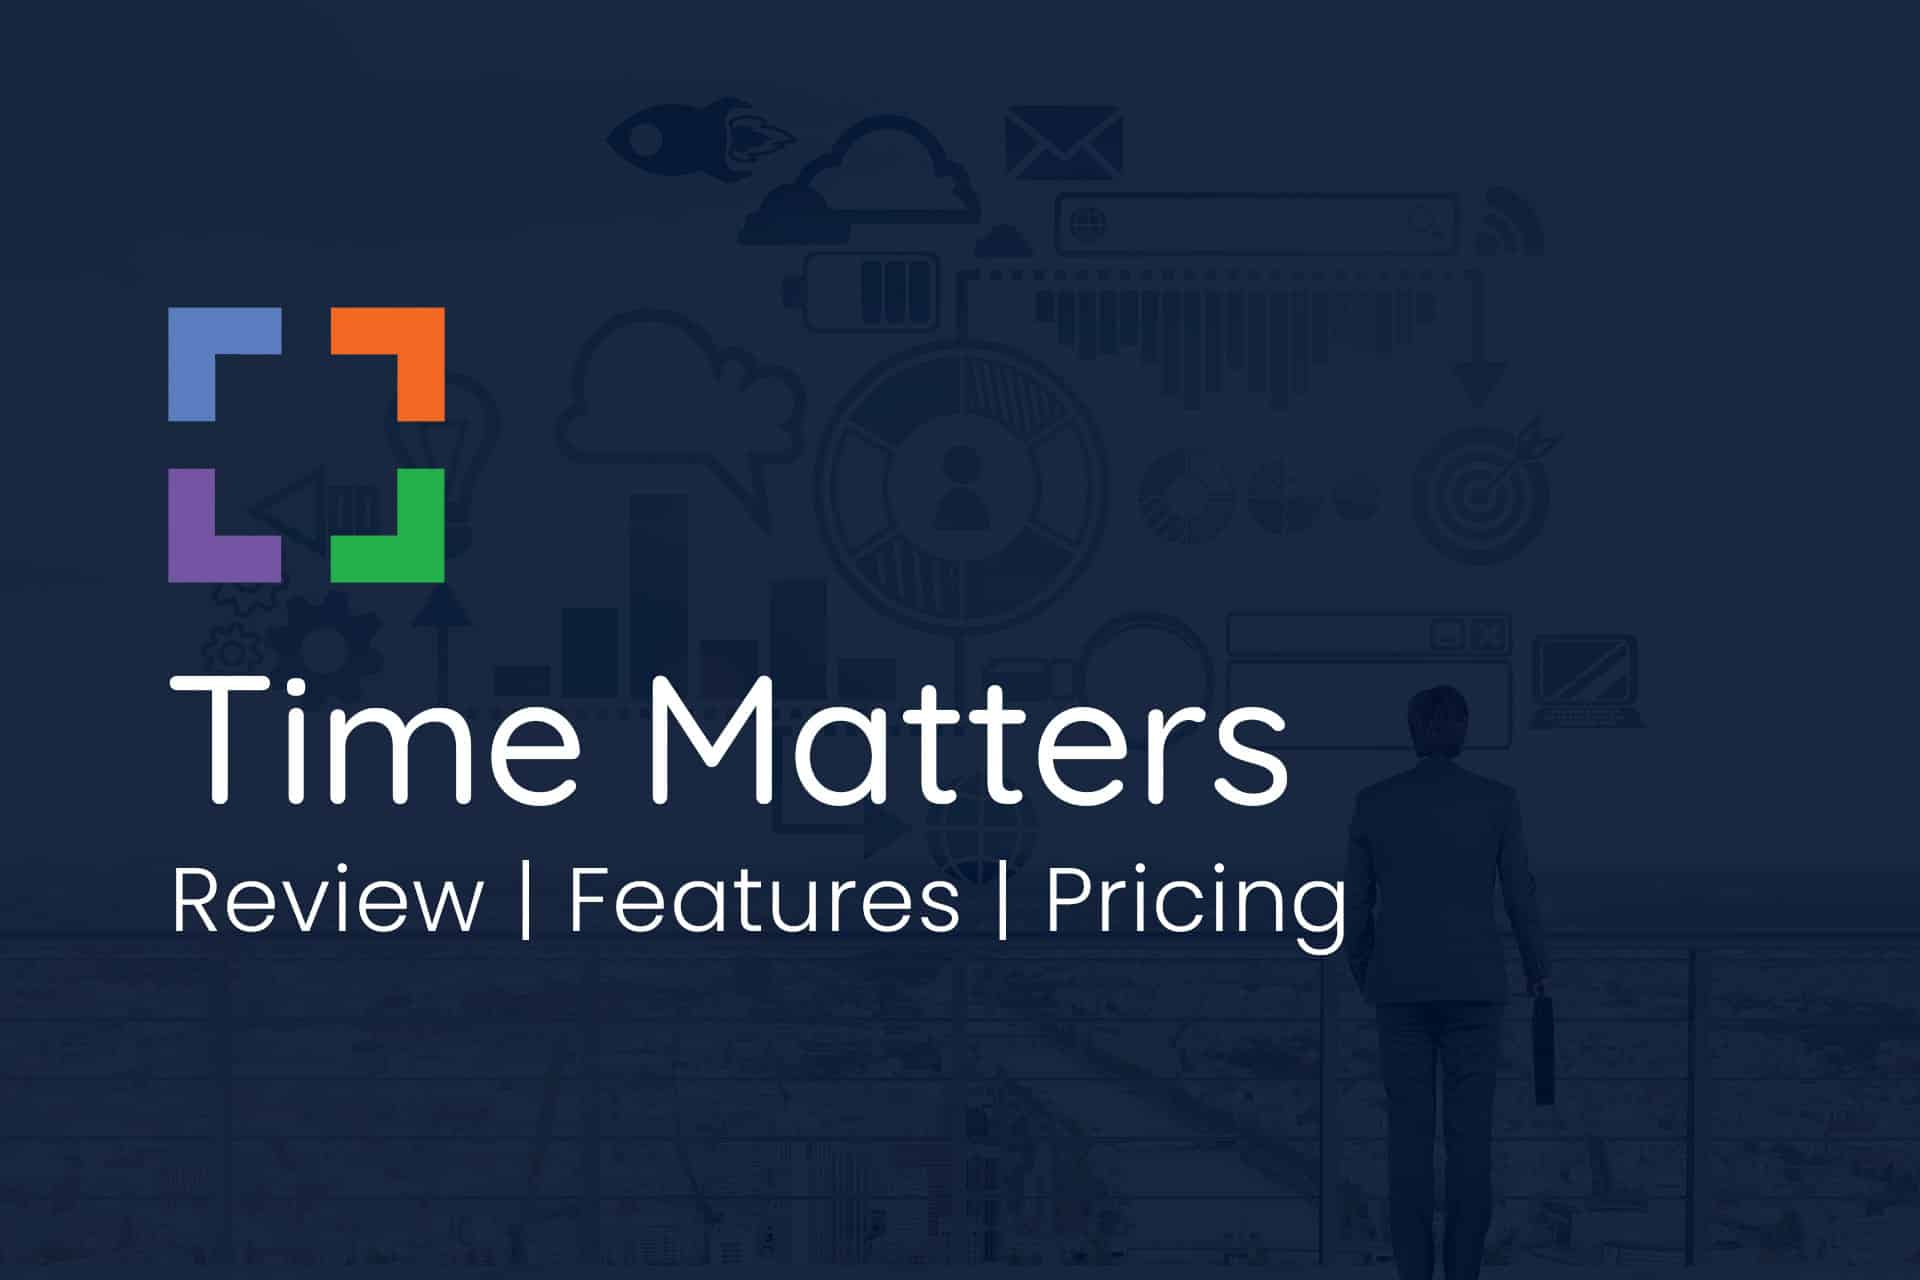 Time Matters: Complete Review, Features, Pricing